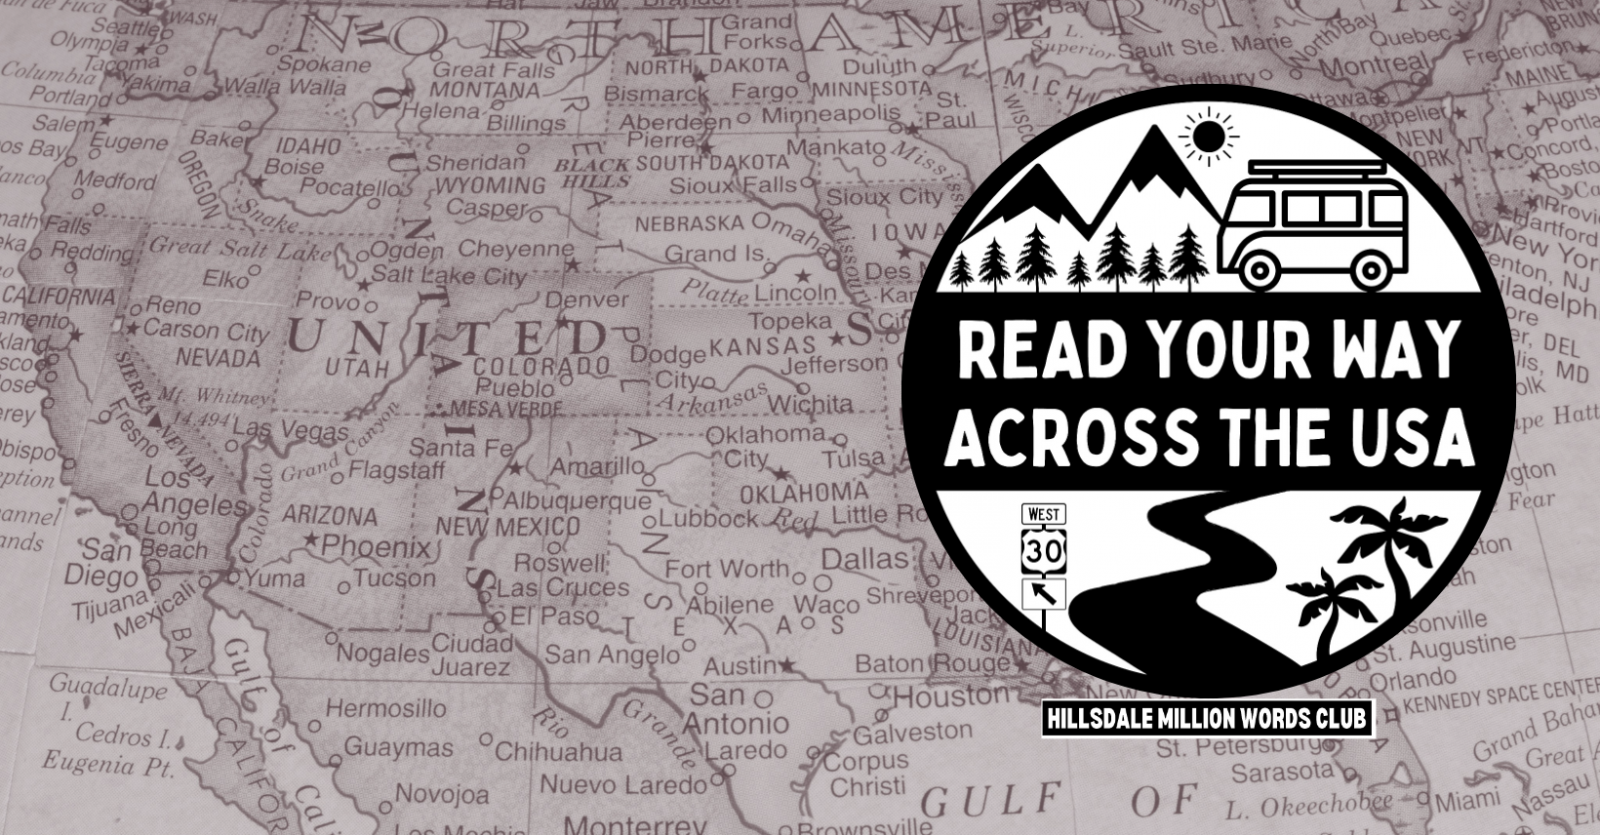 An image of a map of the United States with the 2022-2023 Million Words Club logo "Read Your Way Across the USA."